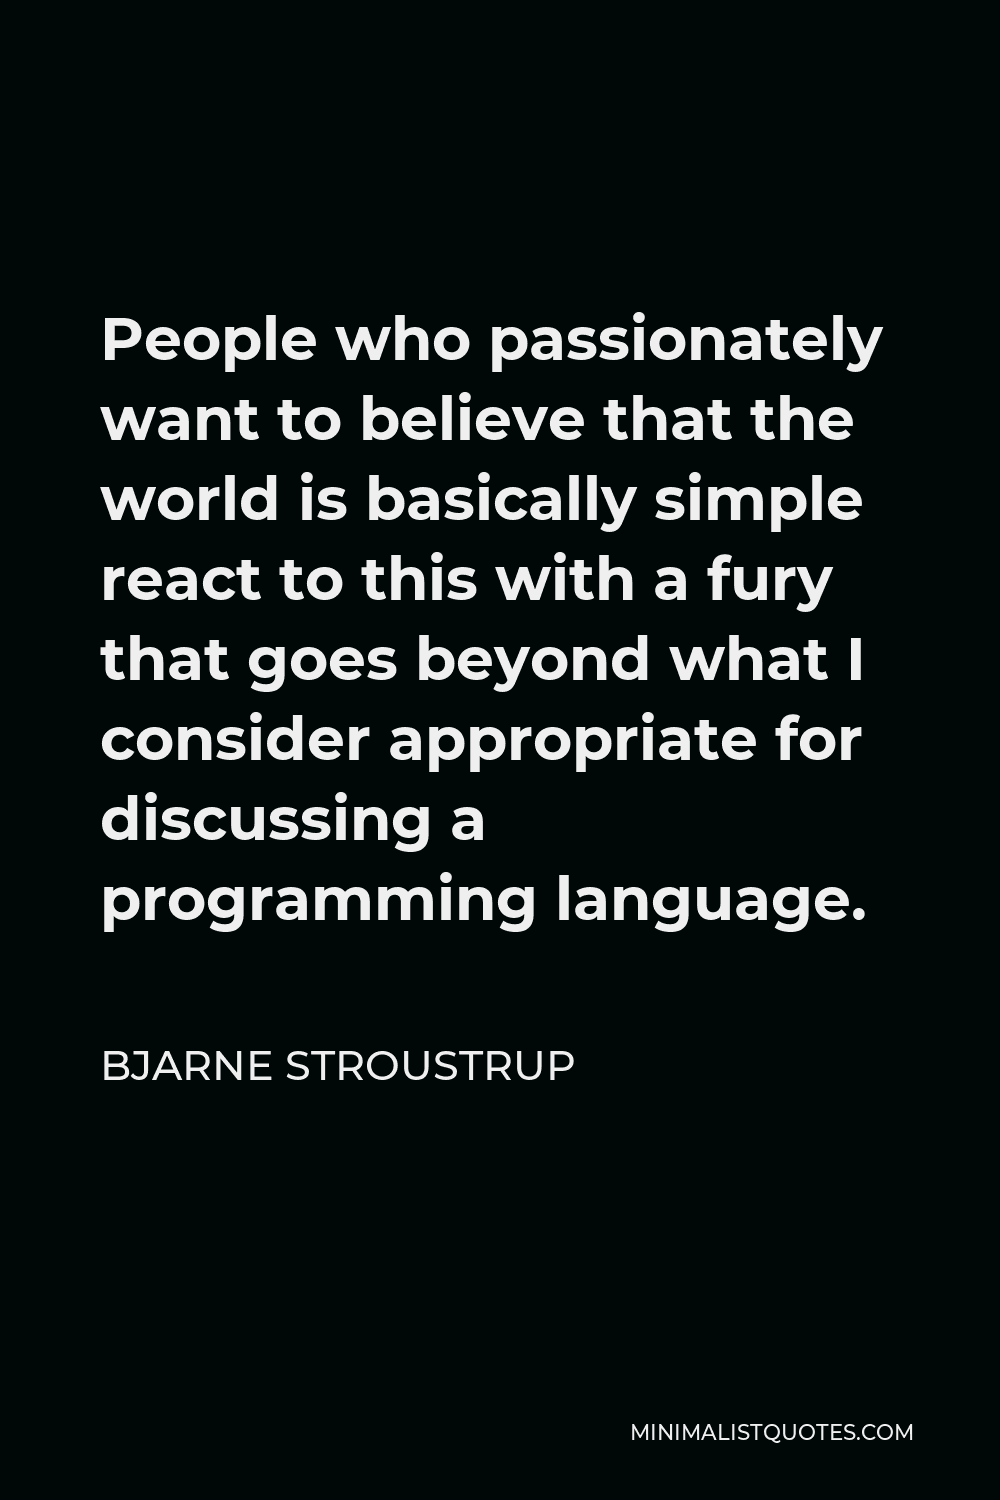 Bjarne Stroustrup Quote - People who passionately want to believe that the world is basically simple react to this with a fury that goes beyond what I consider appropriate for discussing a programming language.